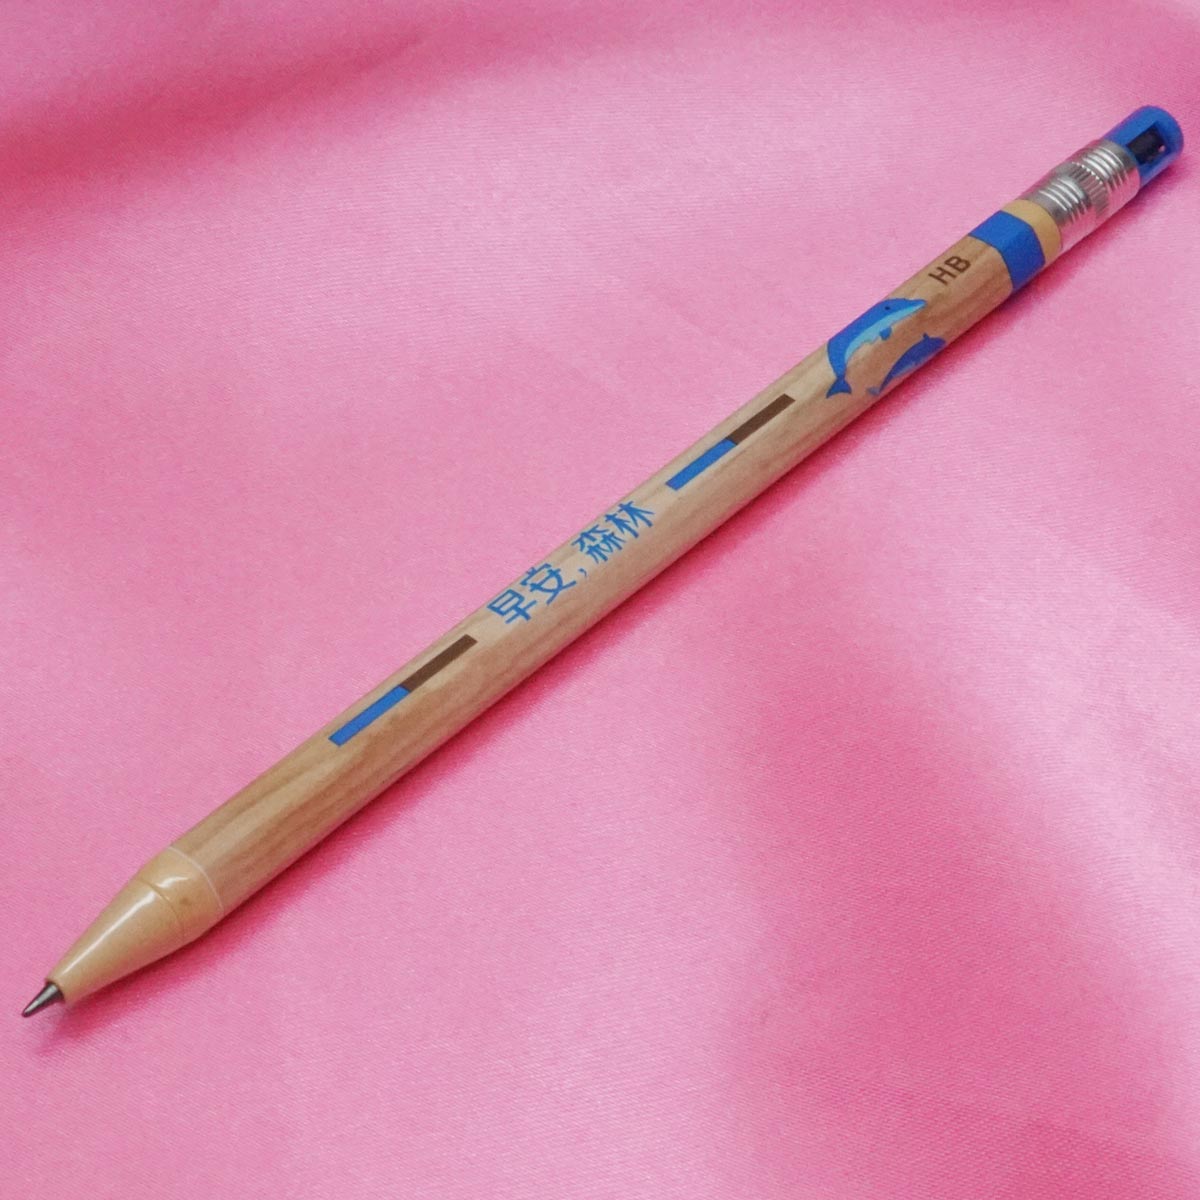 penhouse.in HB 2.0mm Wooden Finish Body Design With Blue Color Click Led Pencil SKU 21522